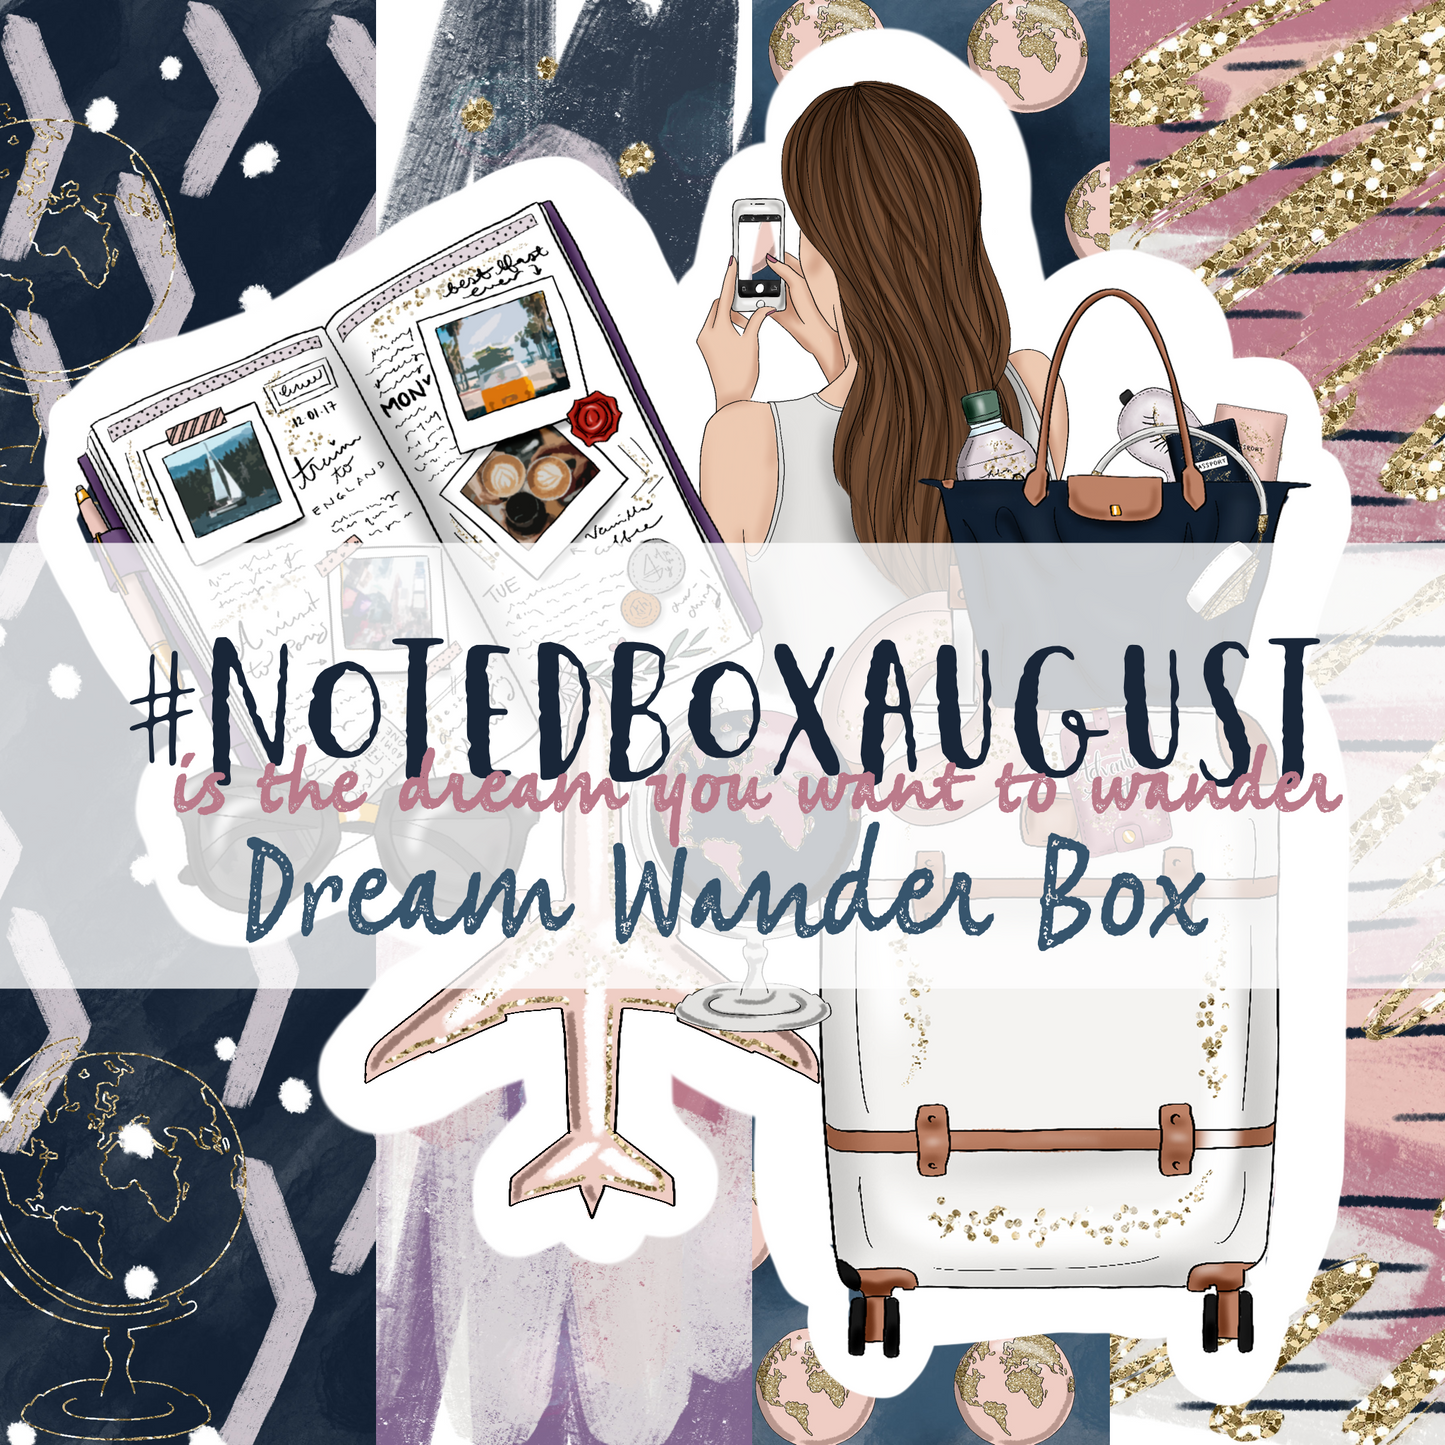 Noted Monthly Box Subscription (August 2018)